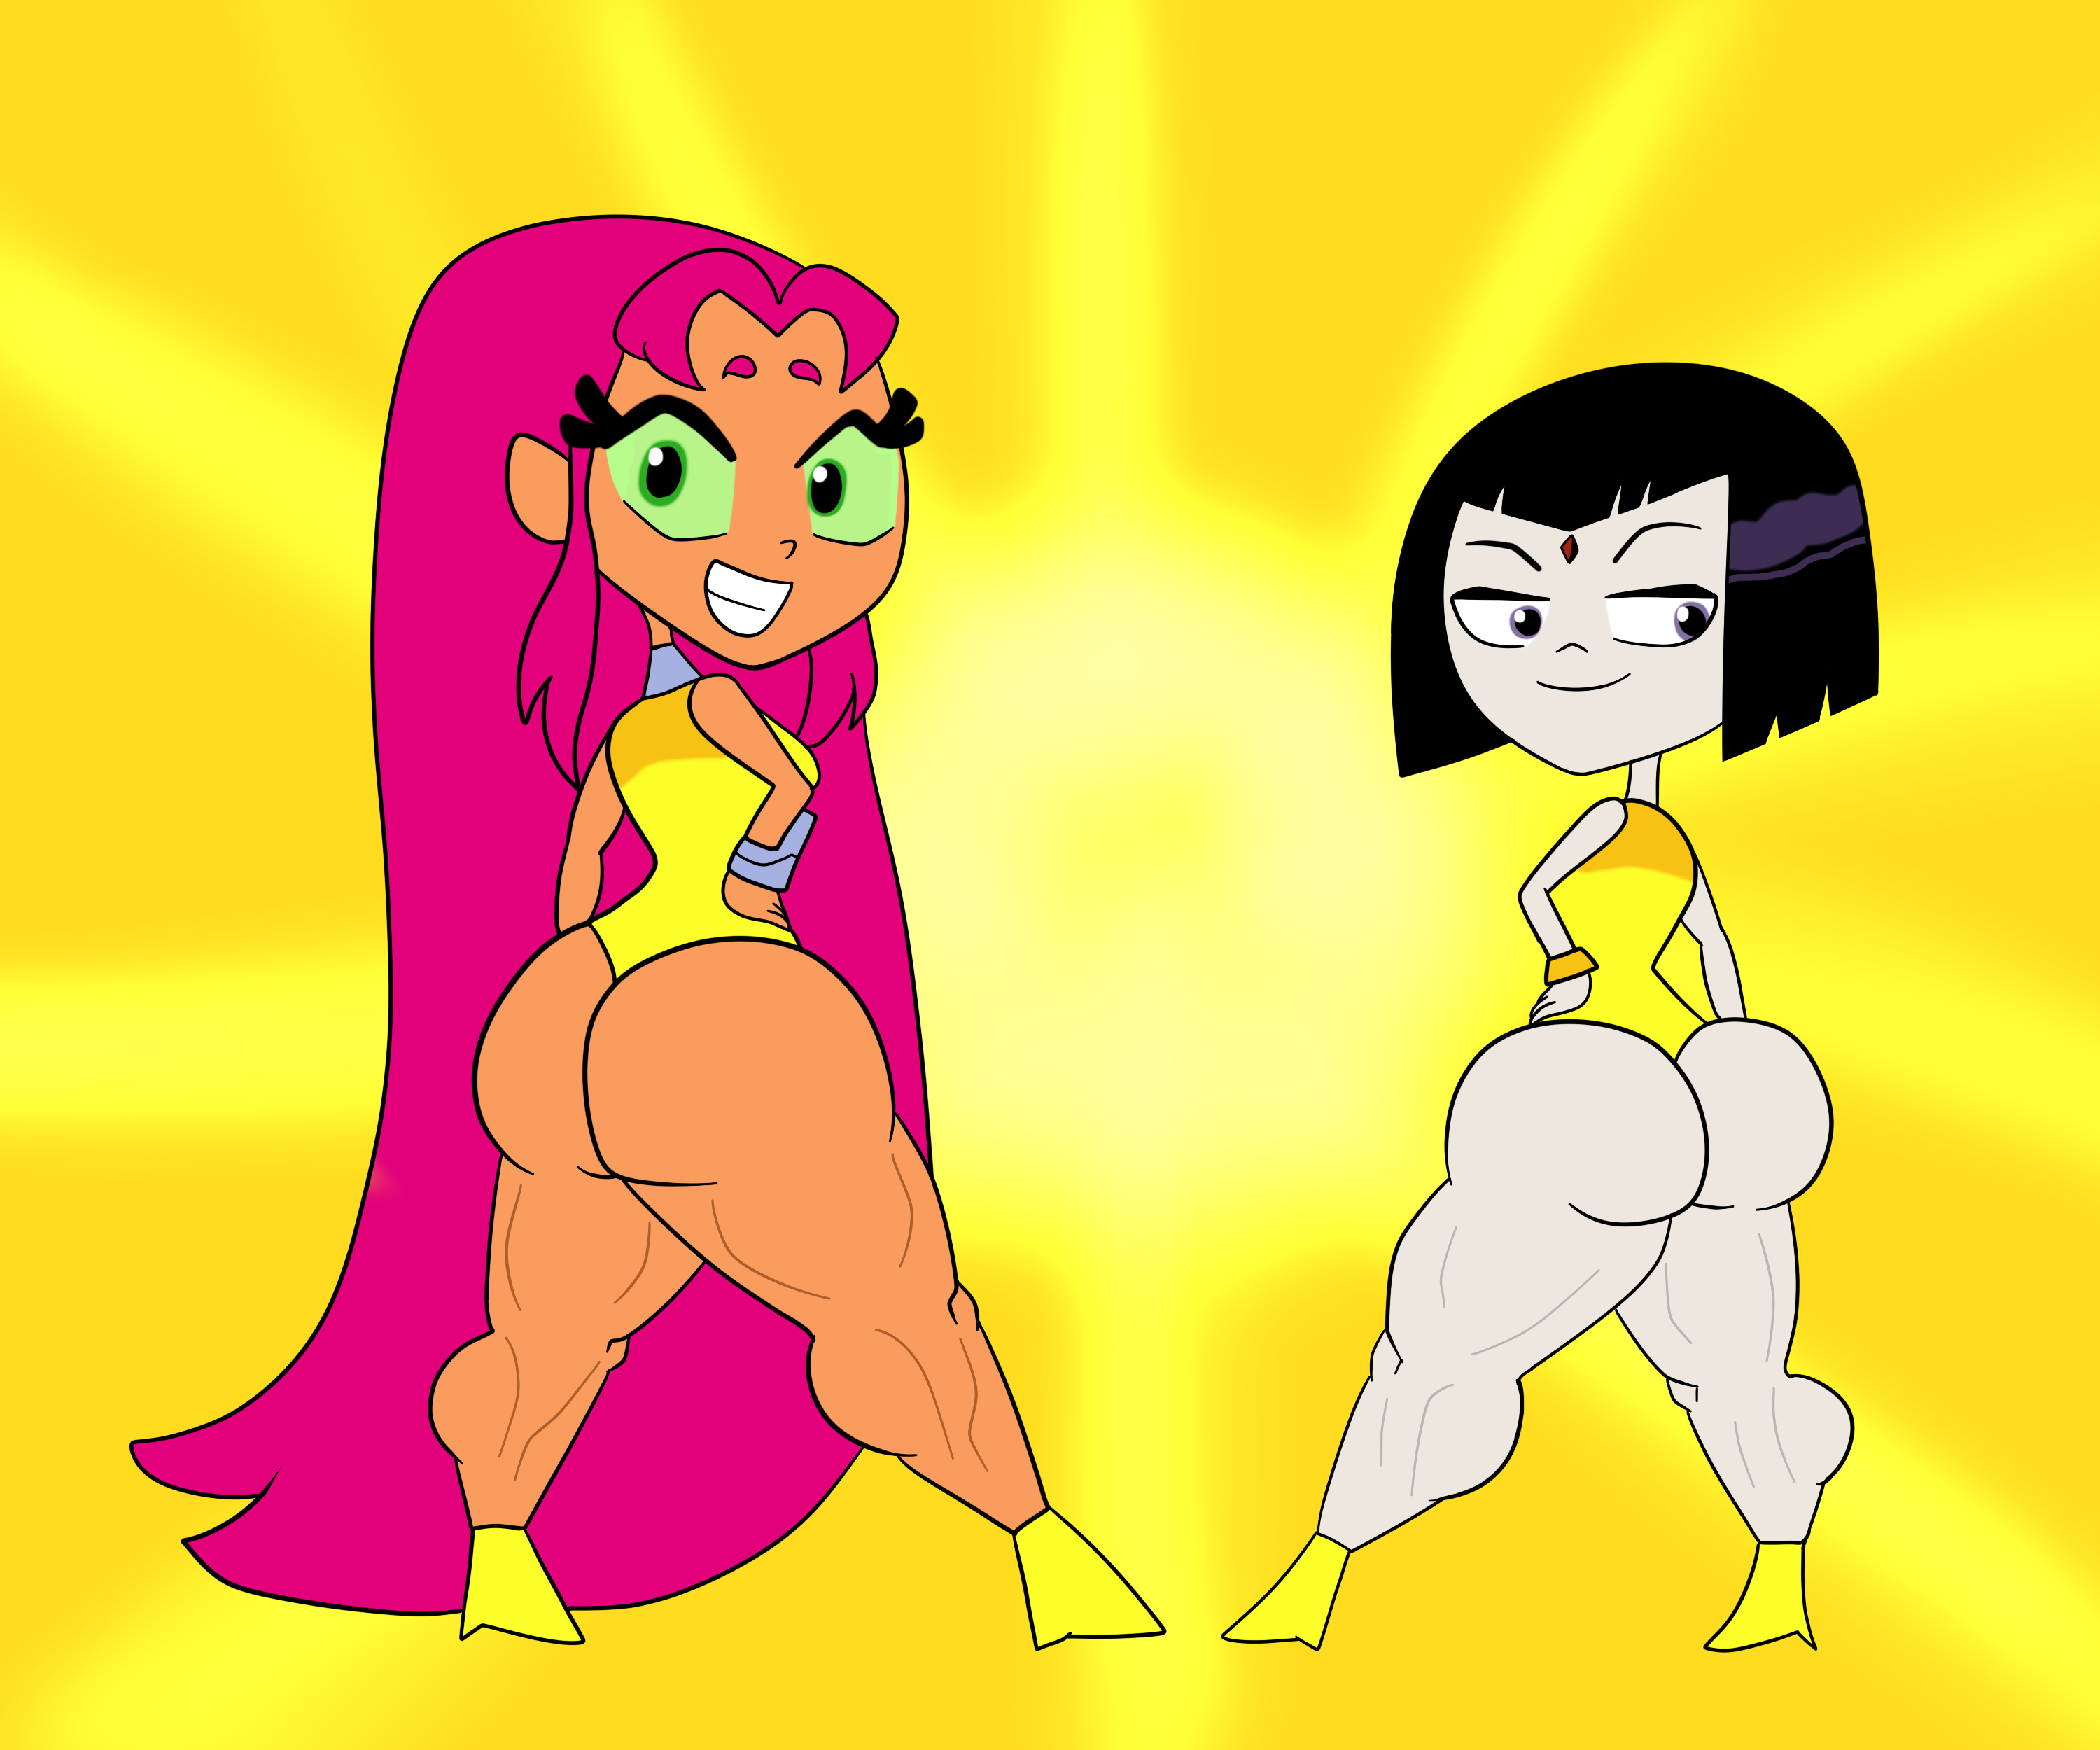 Dirty teen titans toons